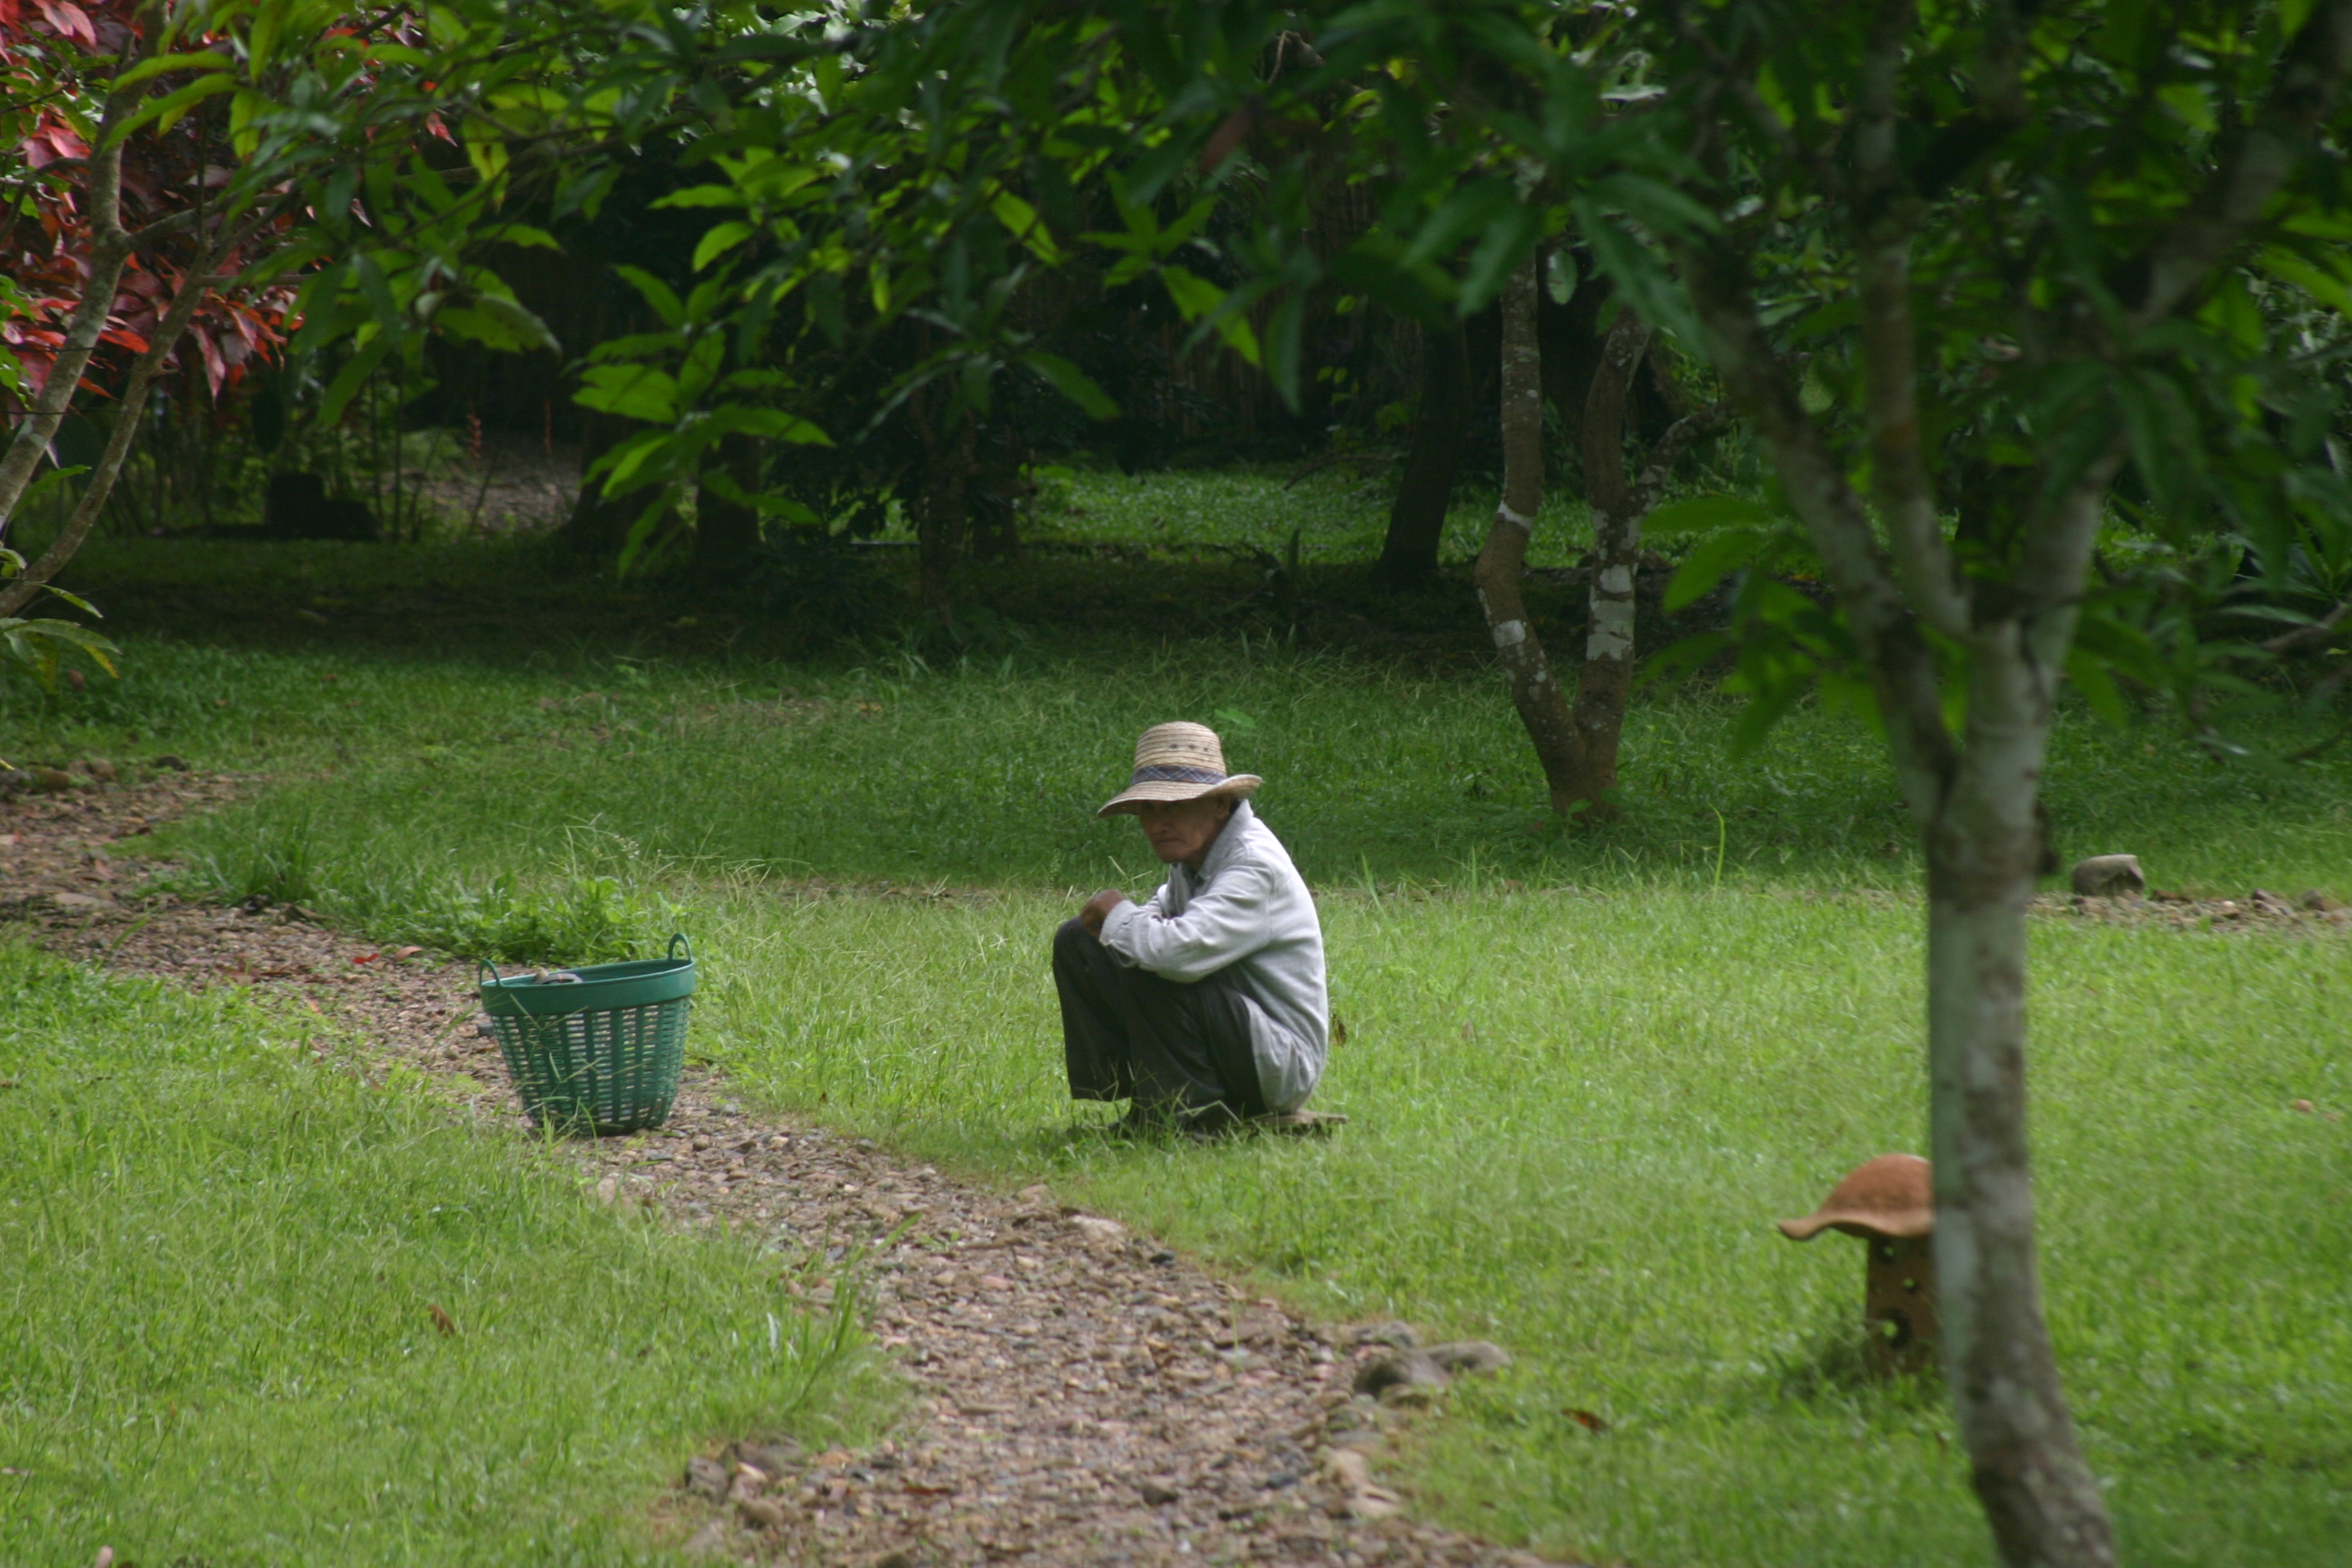 Poverty in old age: Many senior citizens supplement their income as gardeners.